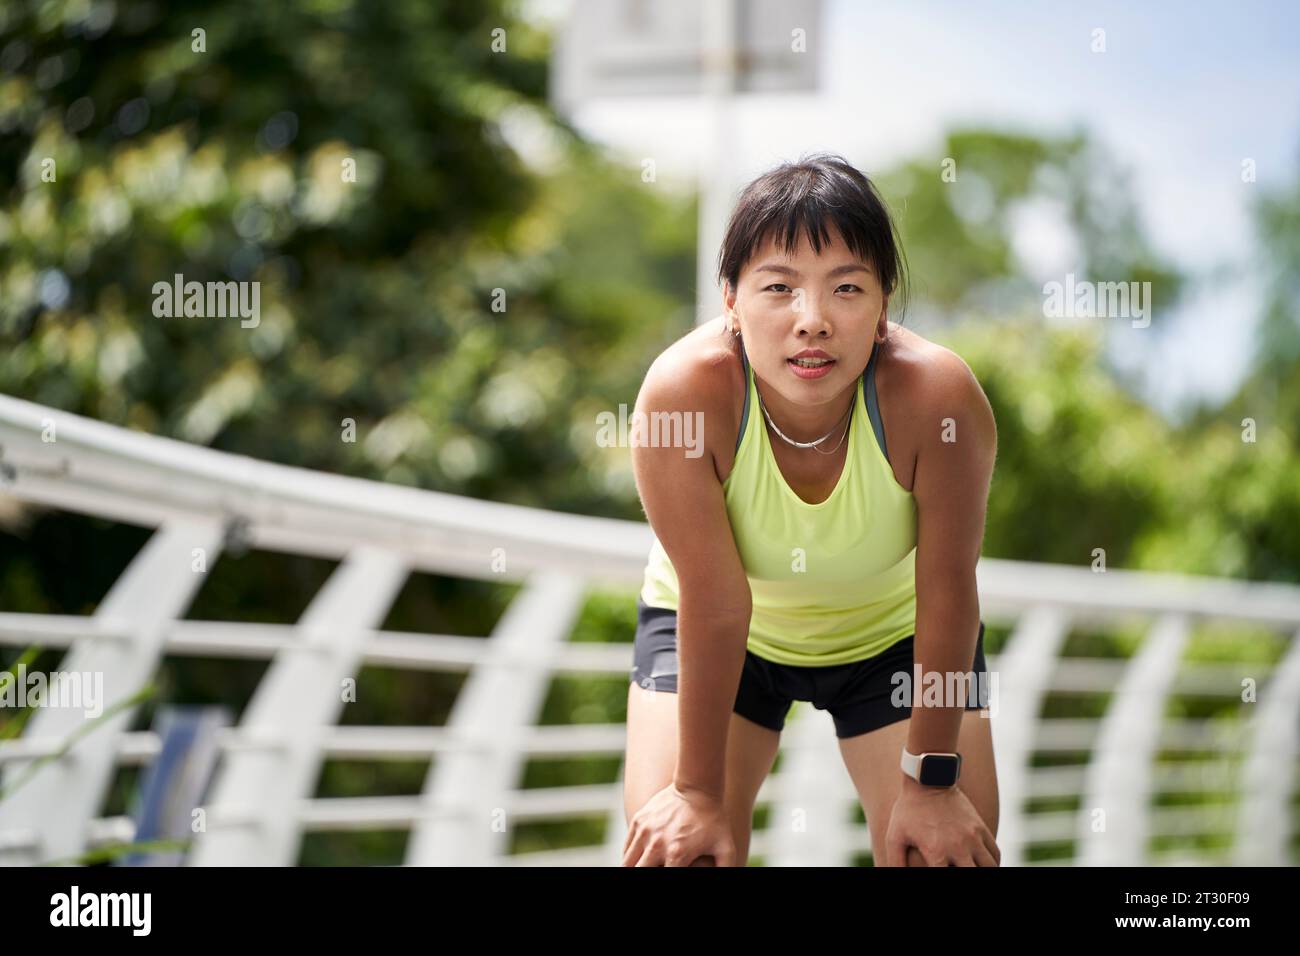 young asian woman female athlete exercising training outdoors Stock Photo